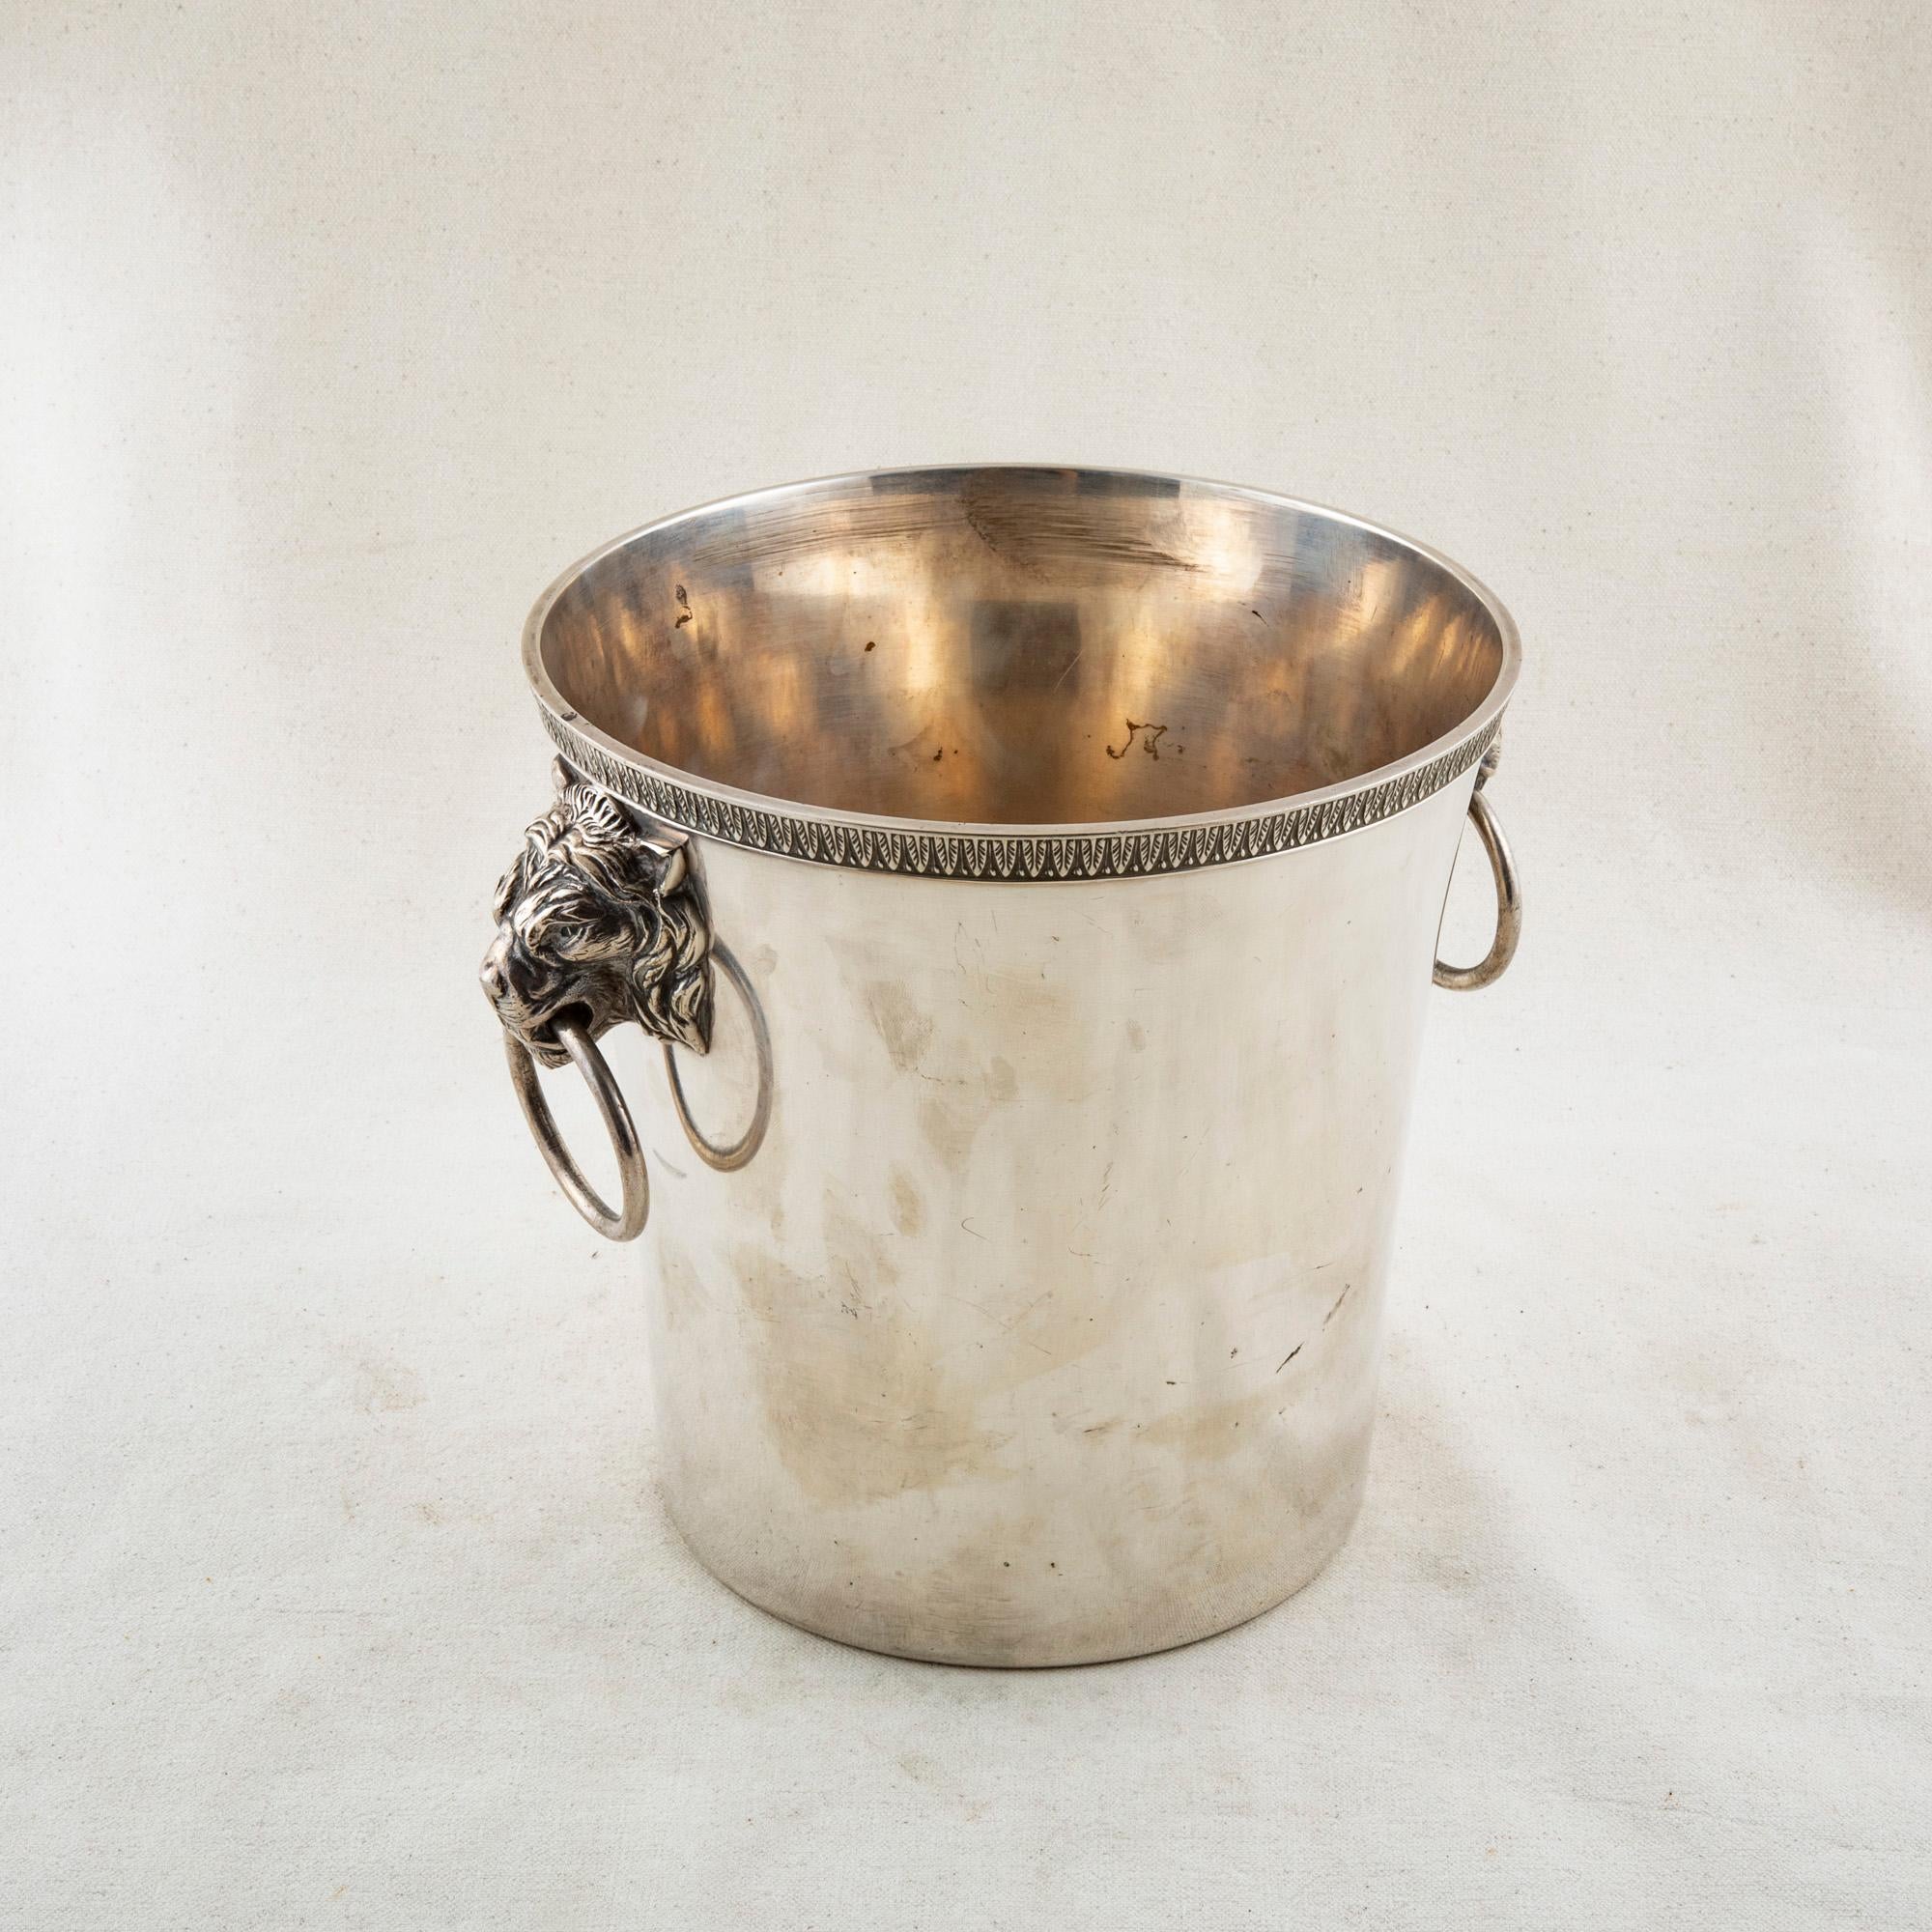 This mid-twentieth century French silver plate over bronze champagne bucket features a lion's head on each side with a drop ring handle. The bucket is stamped with a star hallmark on the bottom and the number 24. A beautiful addition to any bar,